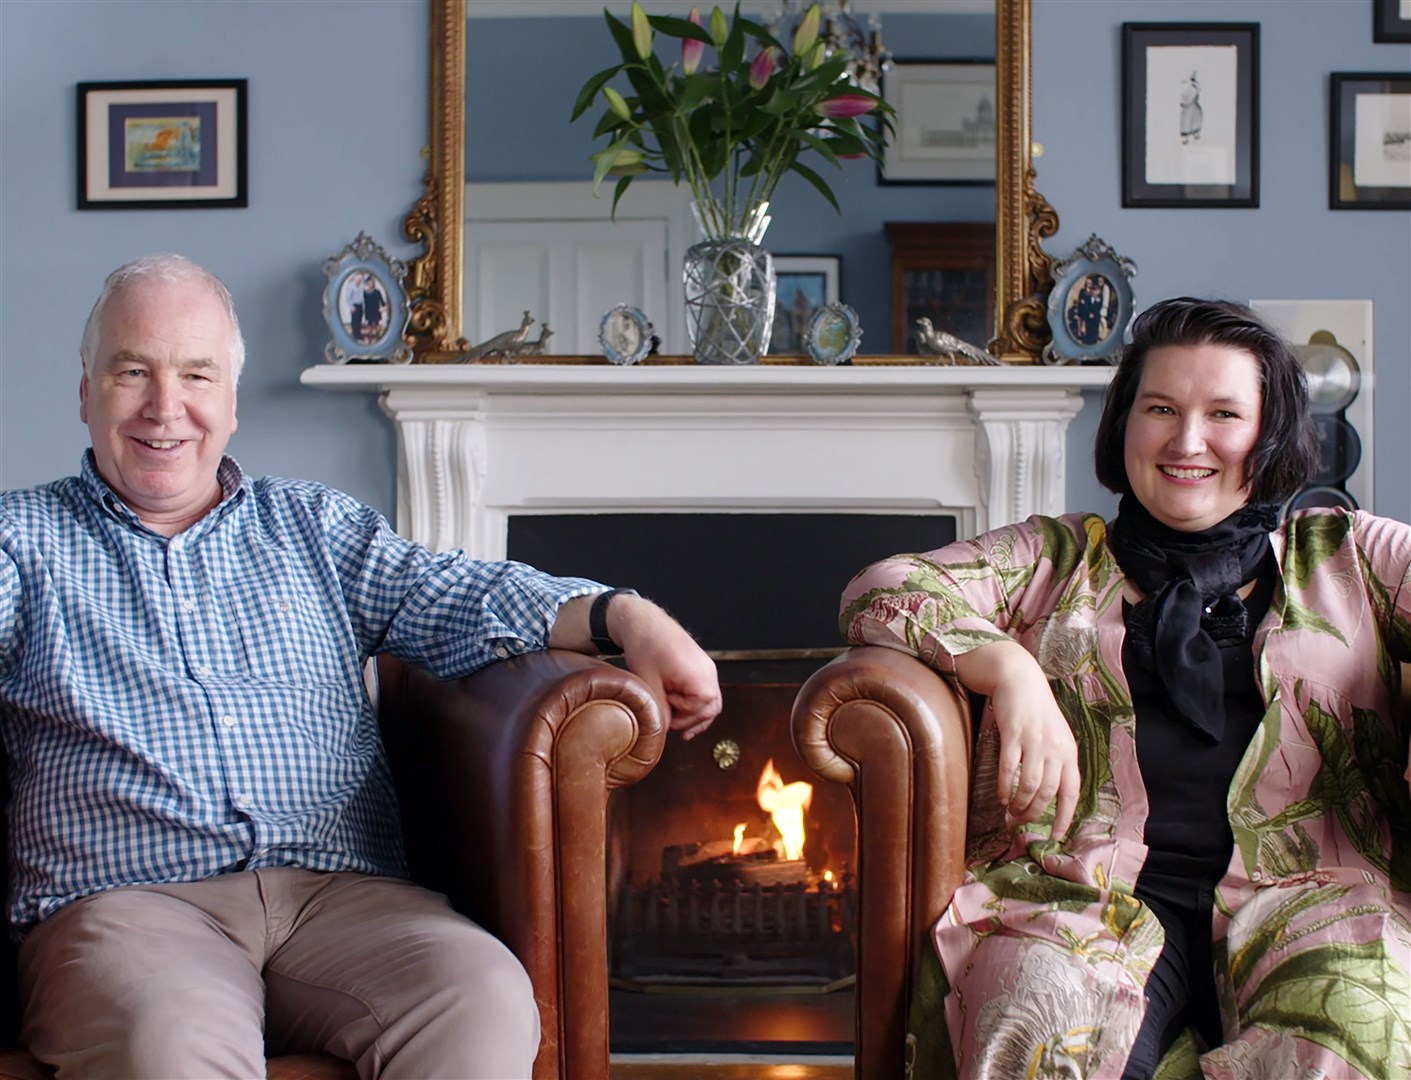 Simon and Galle Patton opened up their home to the judges. Picture: IWC and BBC Scotland